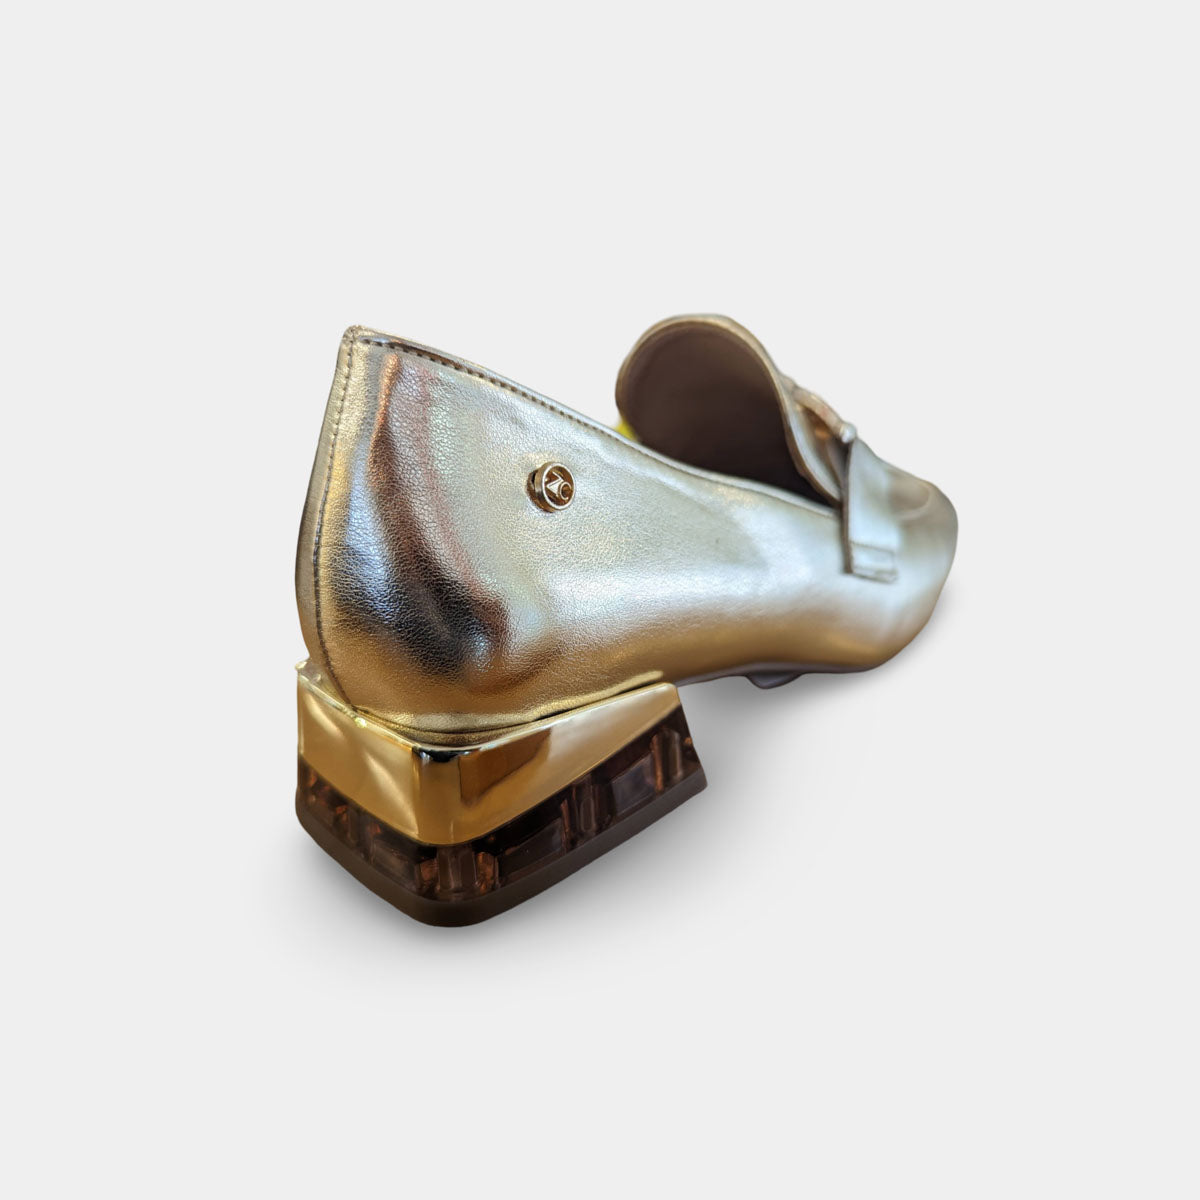 Angle view capturing the overall elegance and sophistication of the Zanni & Co loafers.